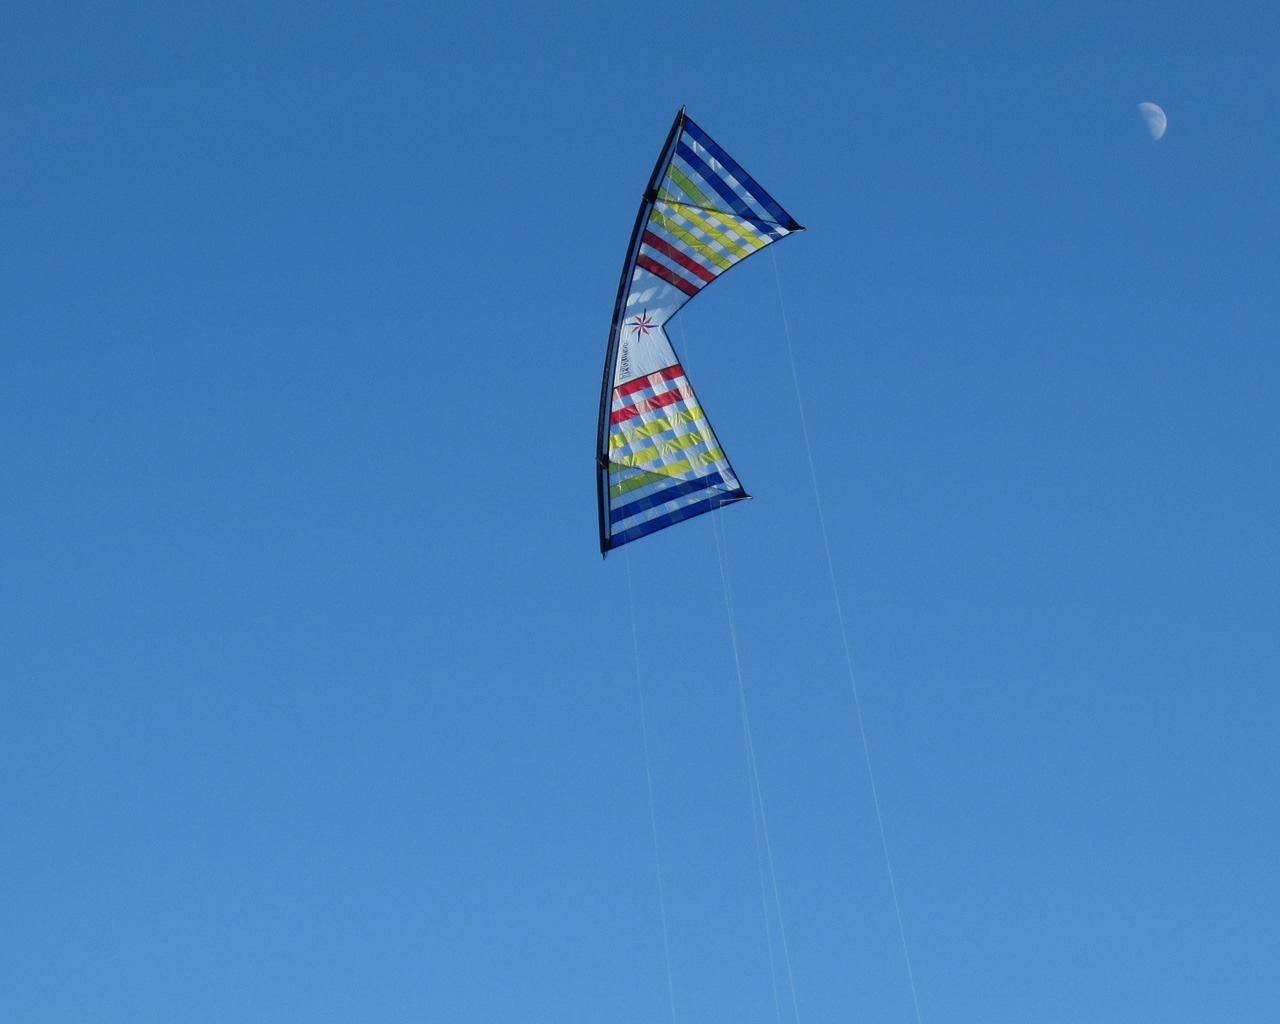 A colorful kite flying